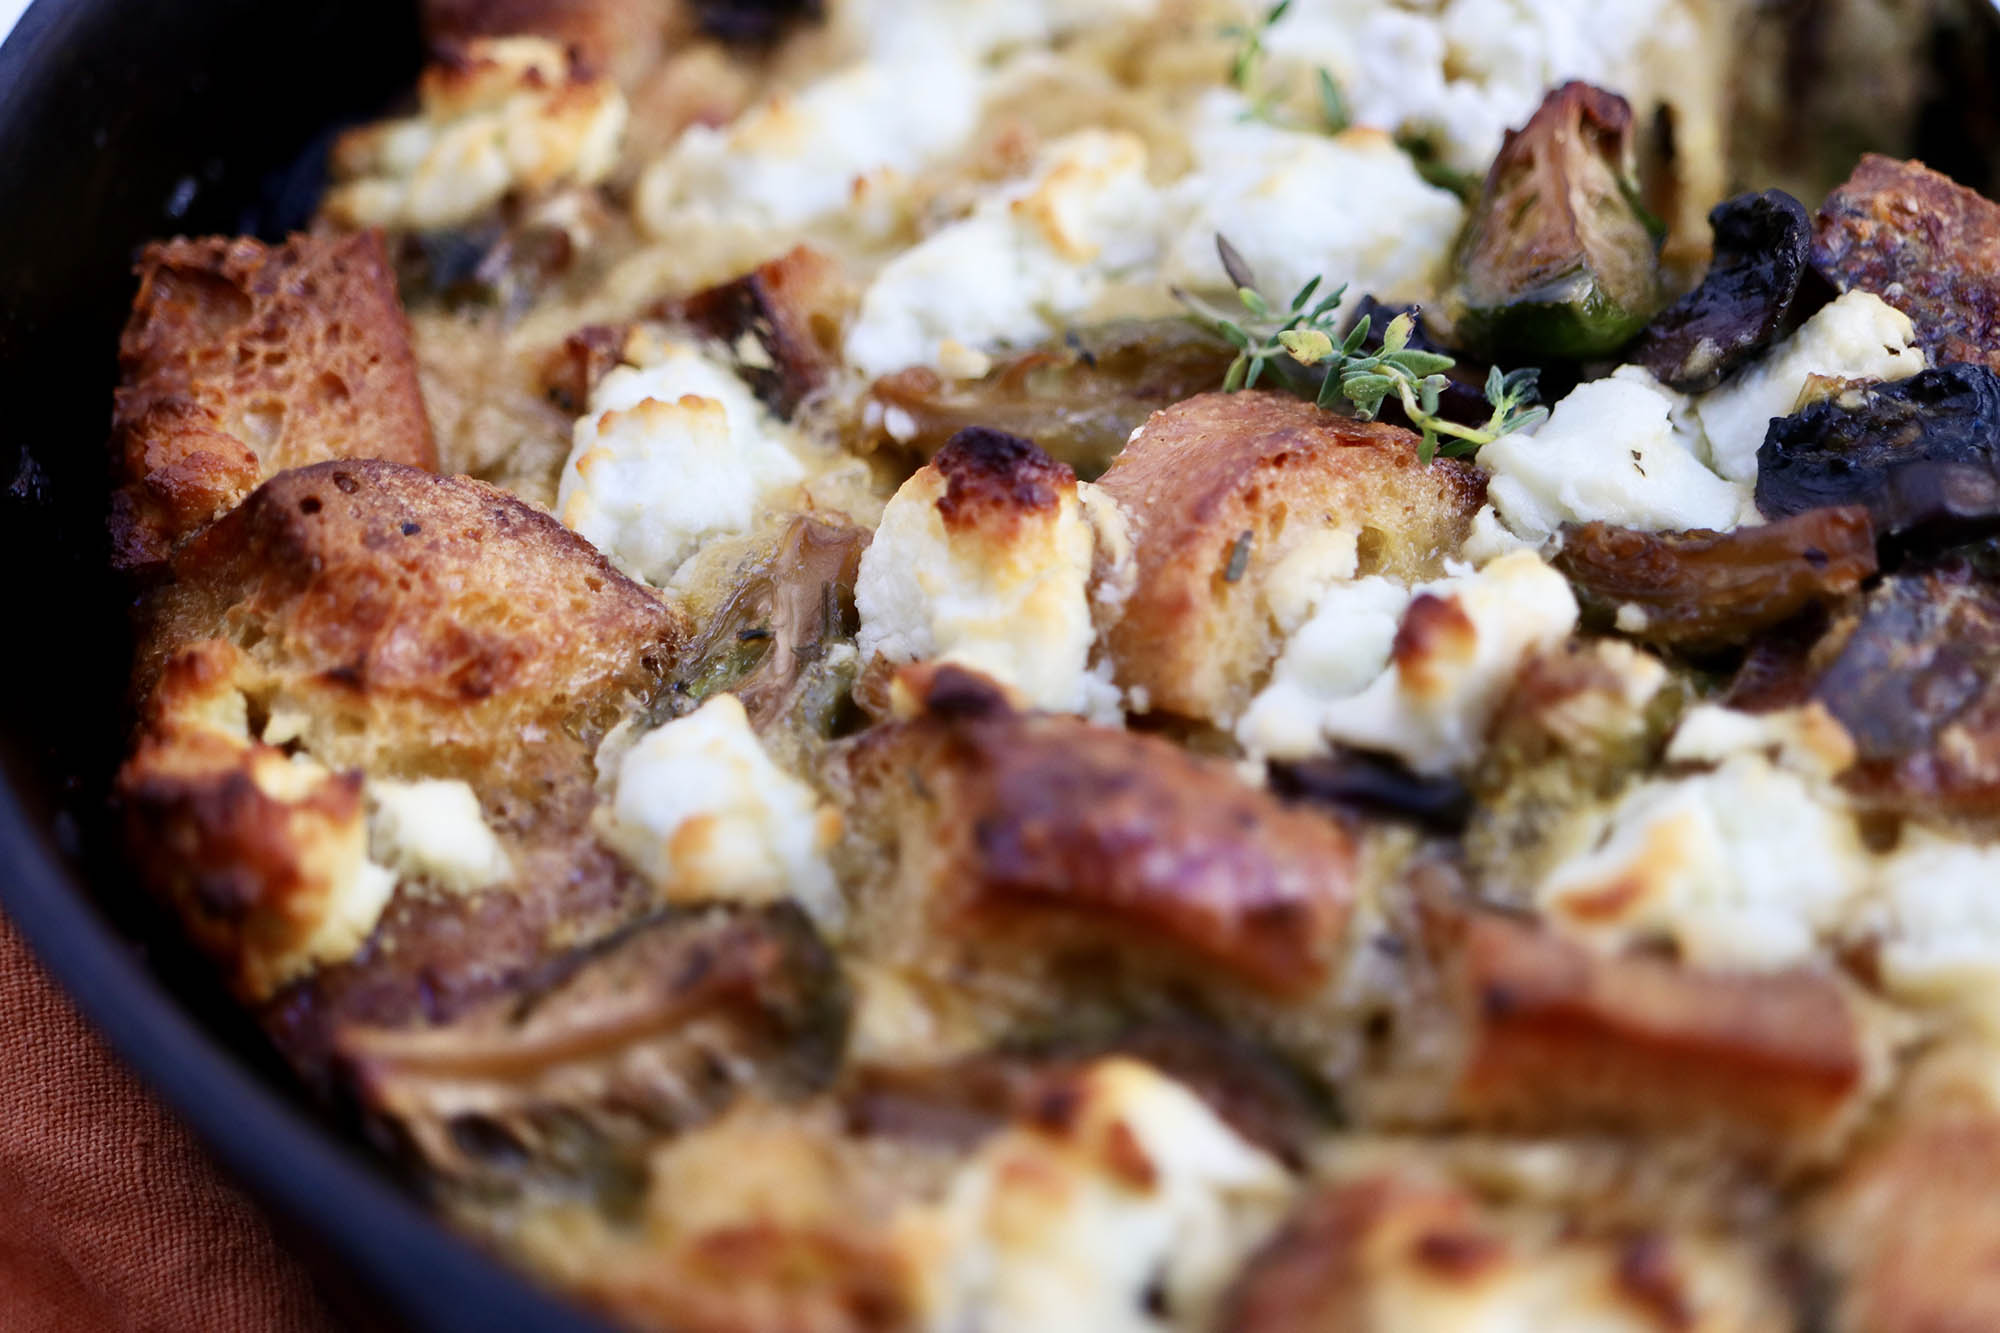 Breakfast Casserole with Brussels Sprouts, Mushrooms and Goat Cheese pictured close up in a cast iron skillet.